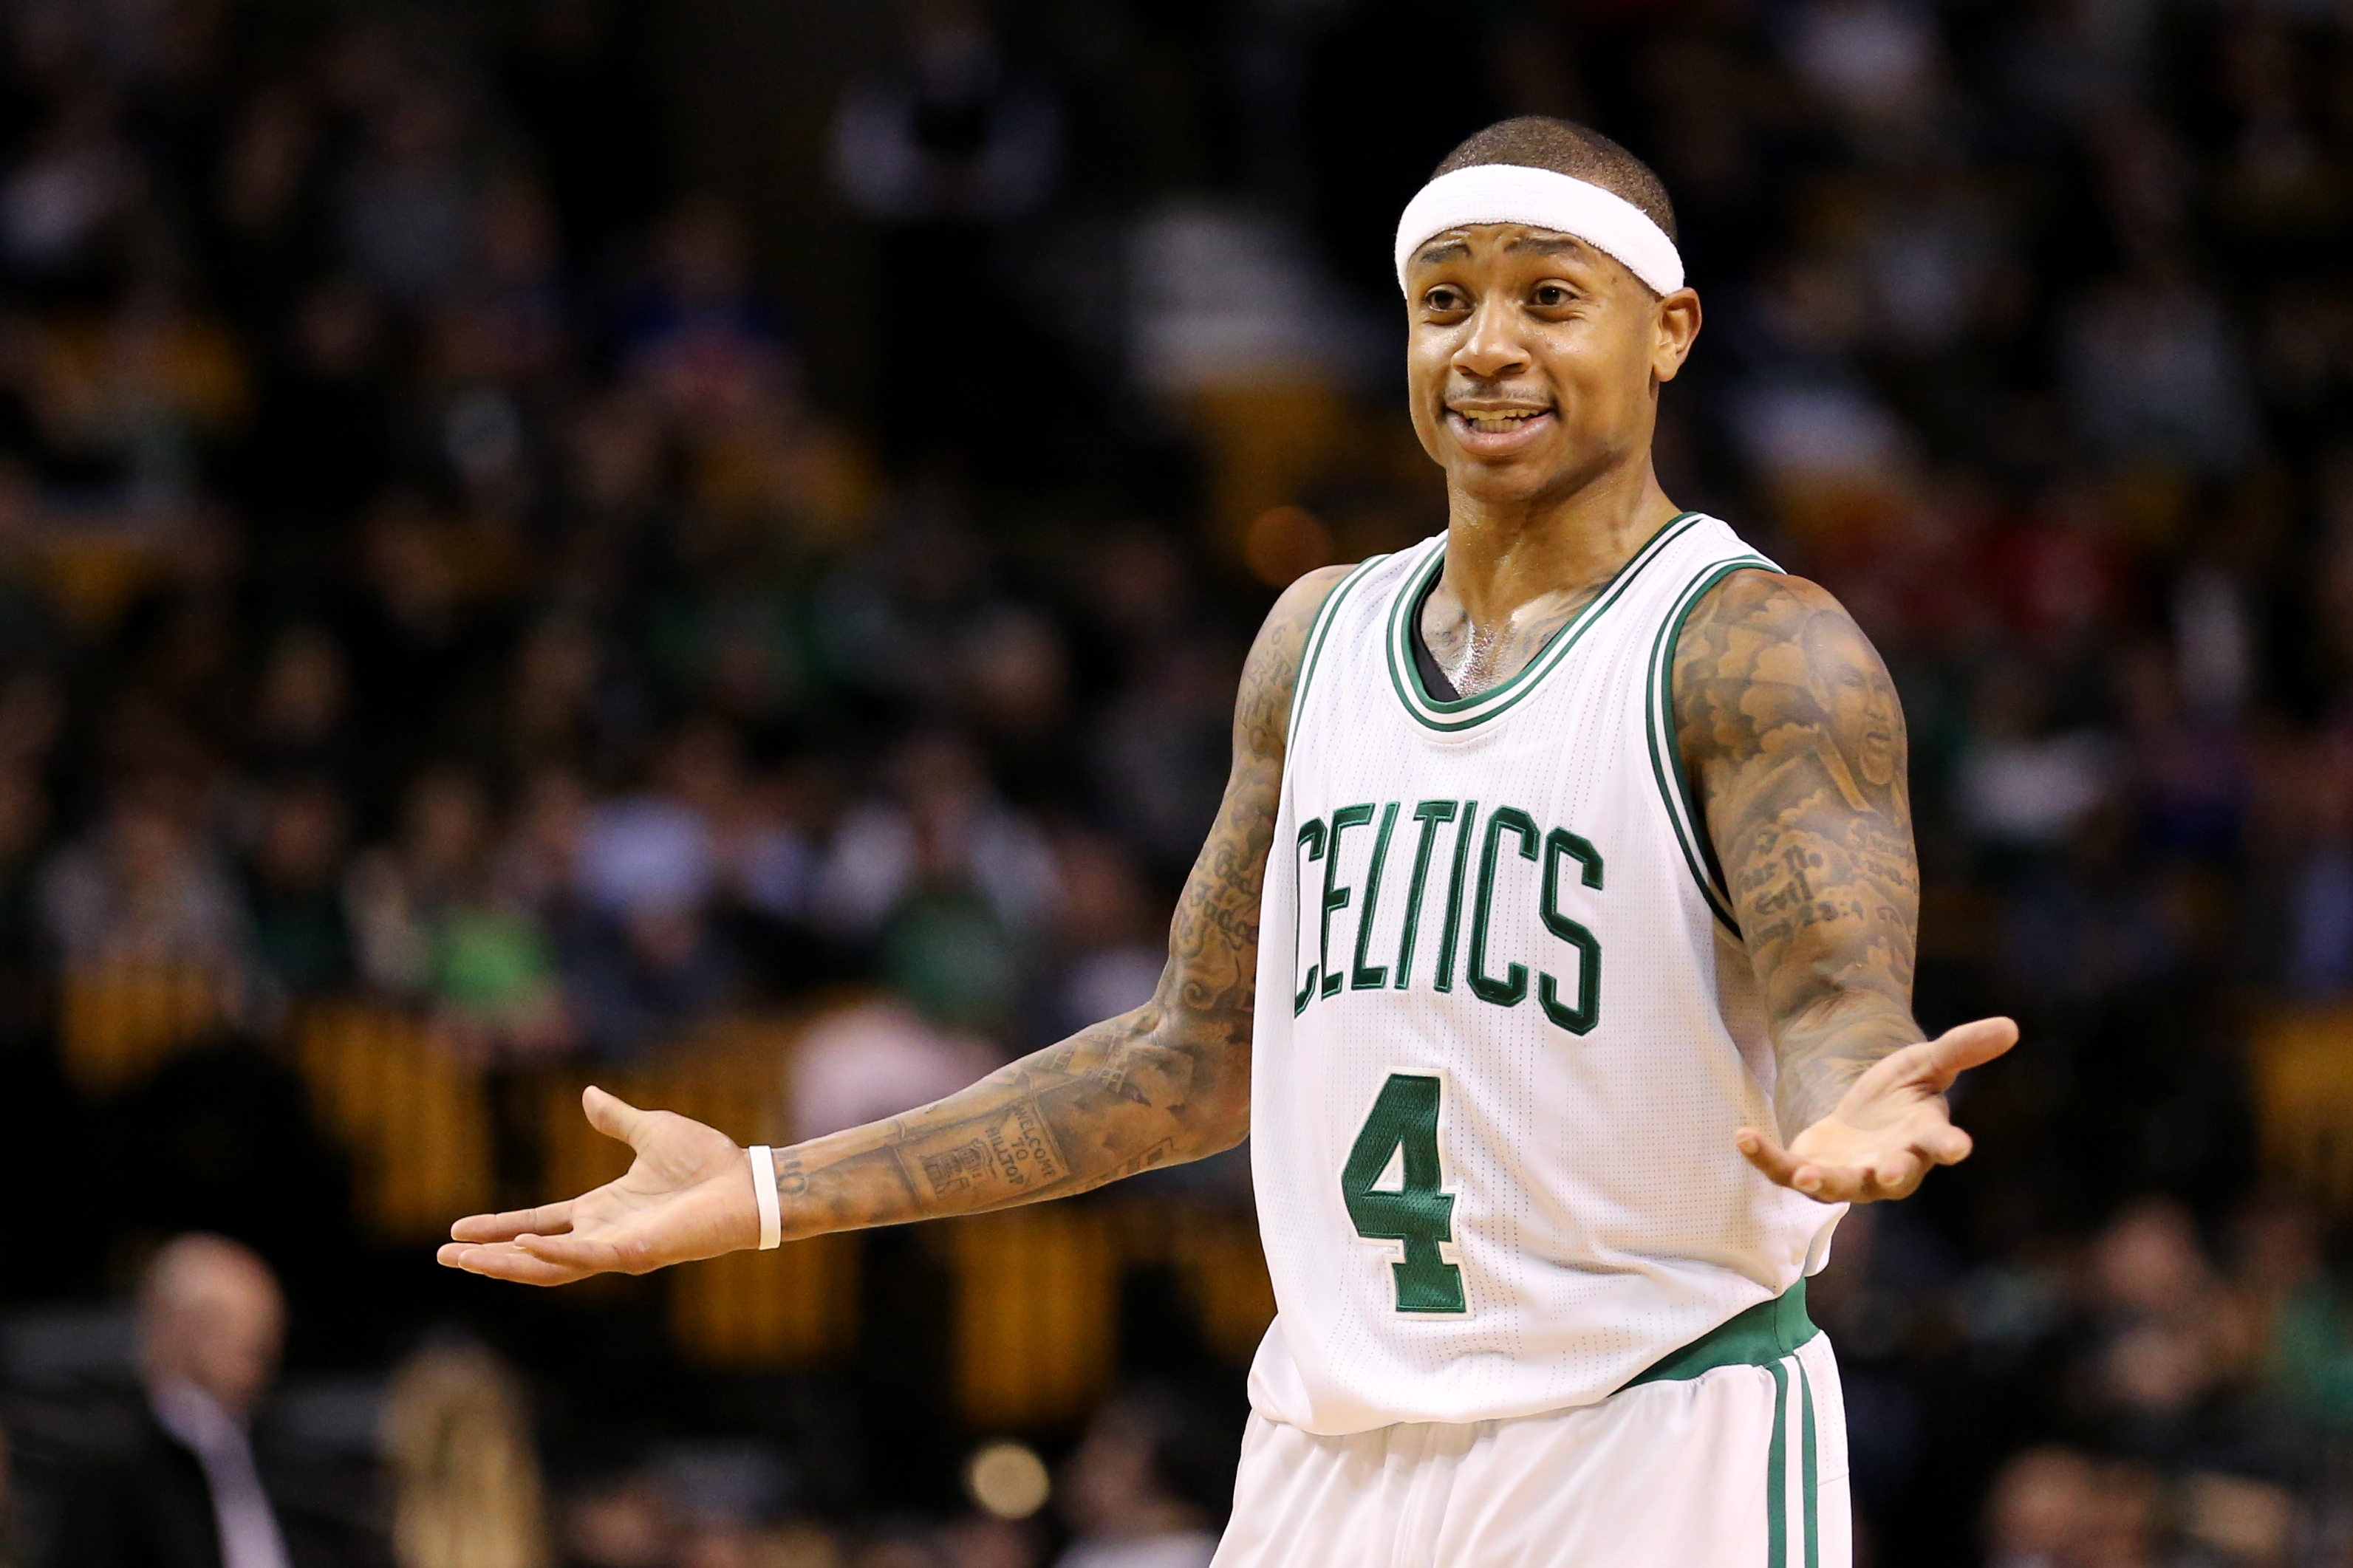 Celtics' Isaiah Thomas ruled out for remainder of playoffs with hip injury